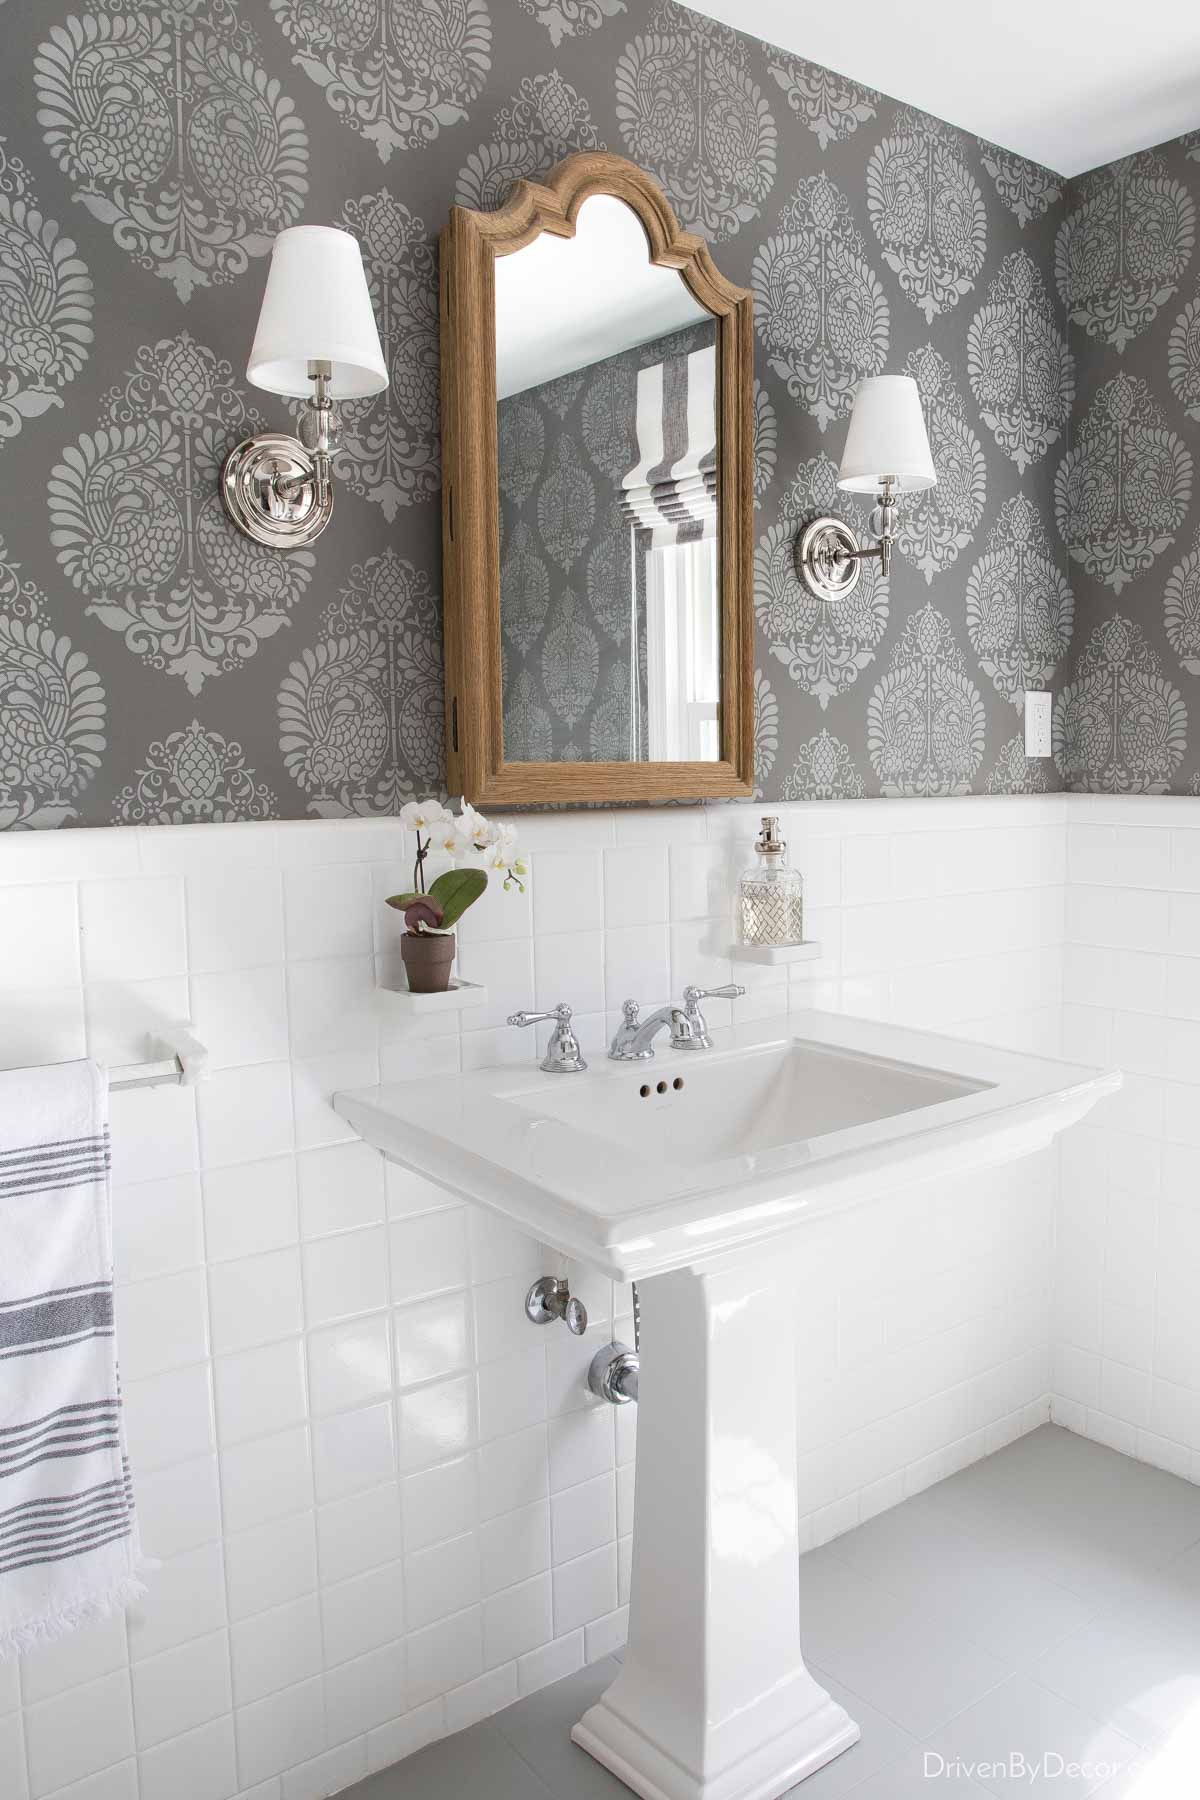 Powder room sink with wall stencils used to create wallpaper-like pattern on walls